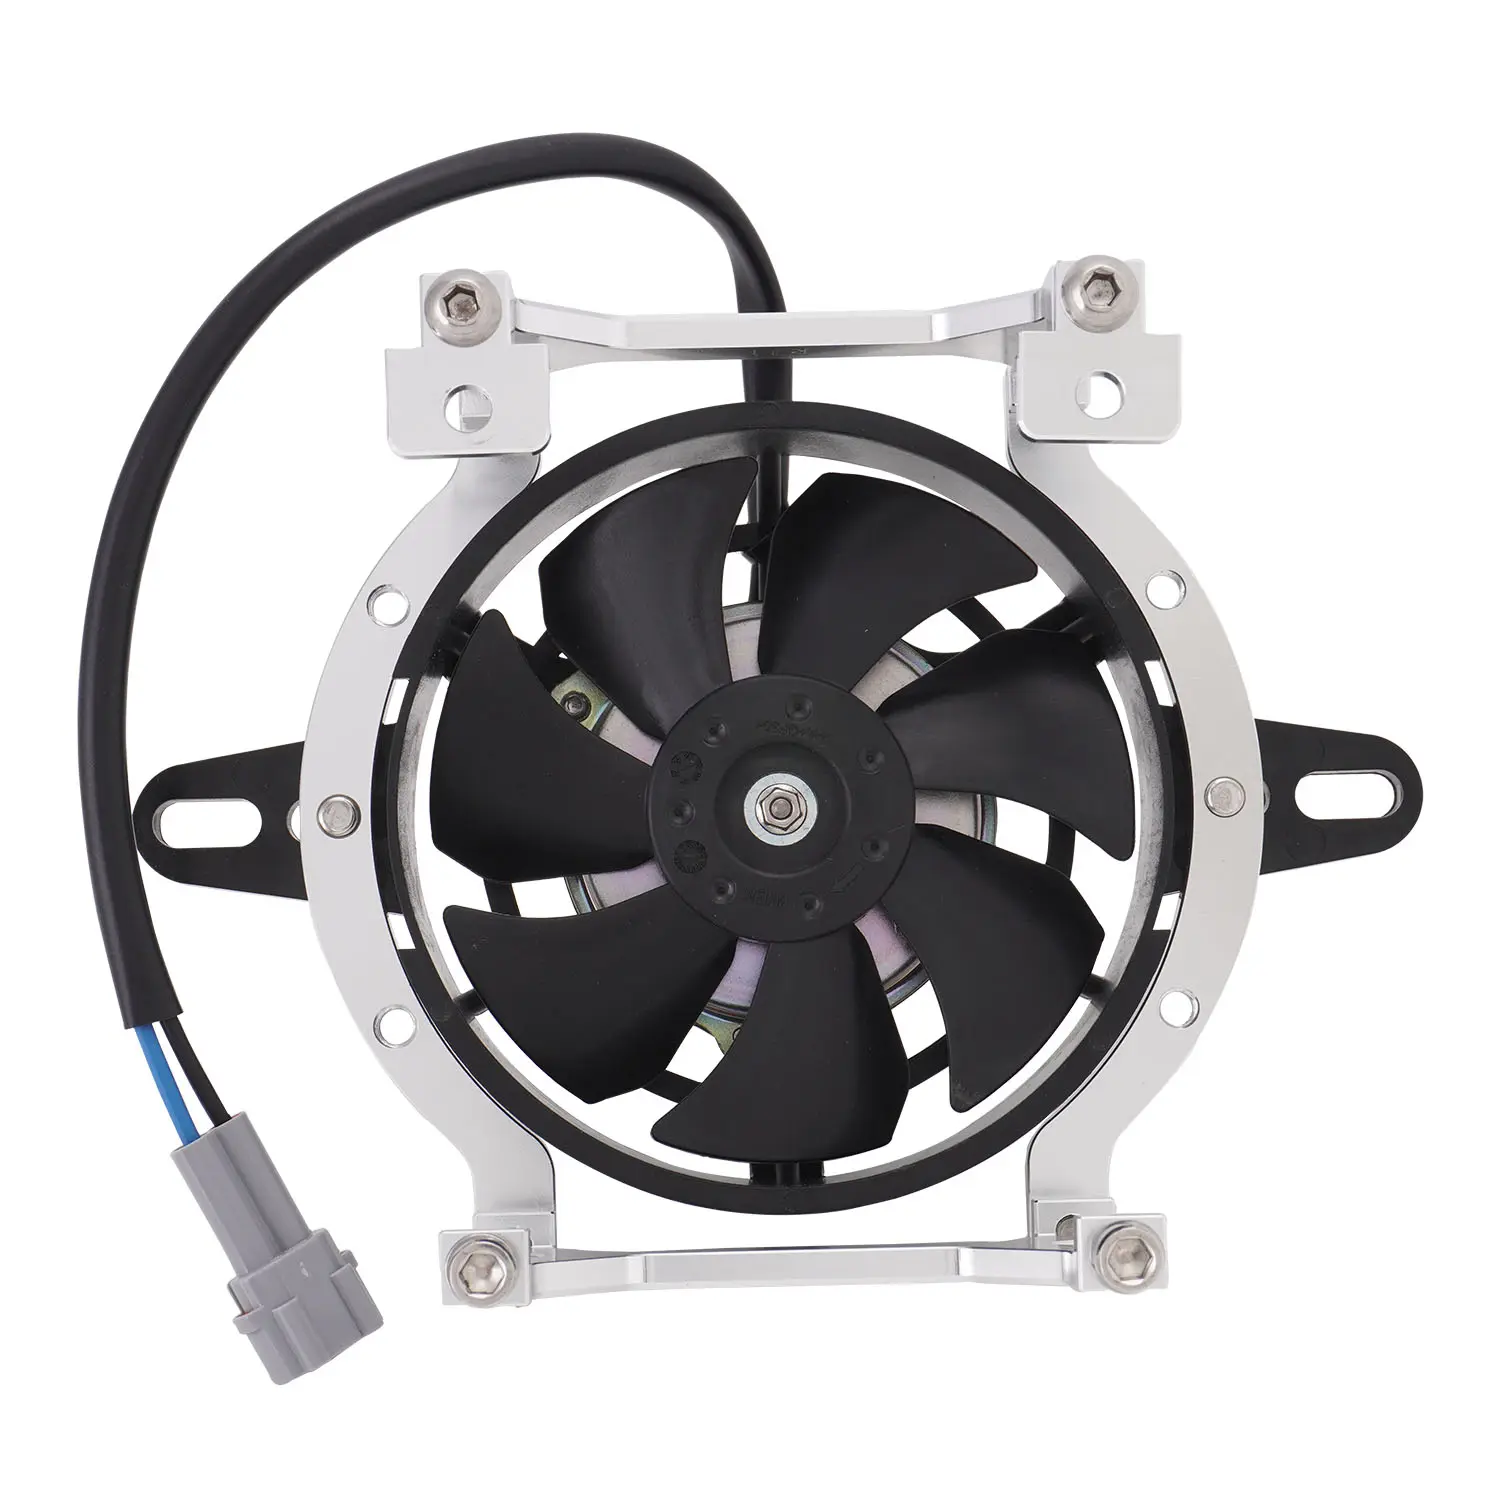 JFG Motorcycle Waterproof Cooling Fan Oil Cooler Heat Electric Engine Radiator Cooling Fan For 150cc 200cc 250cc